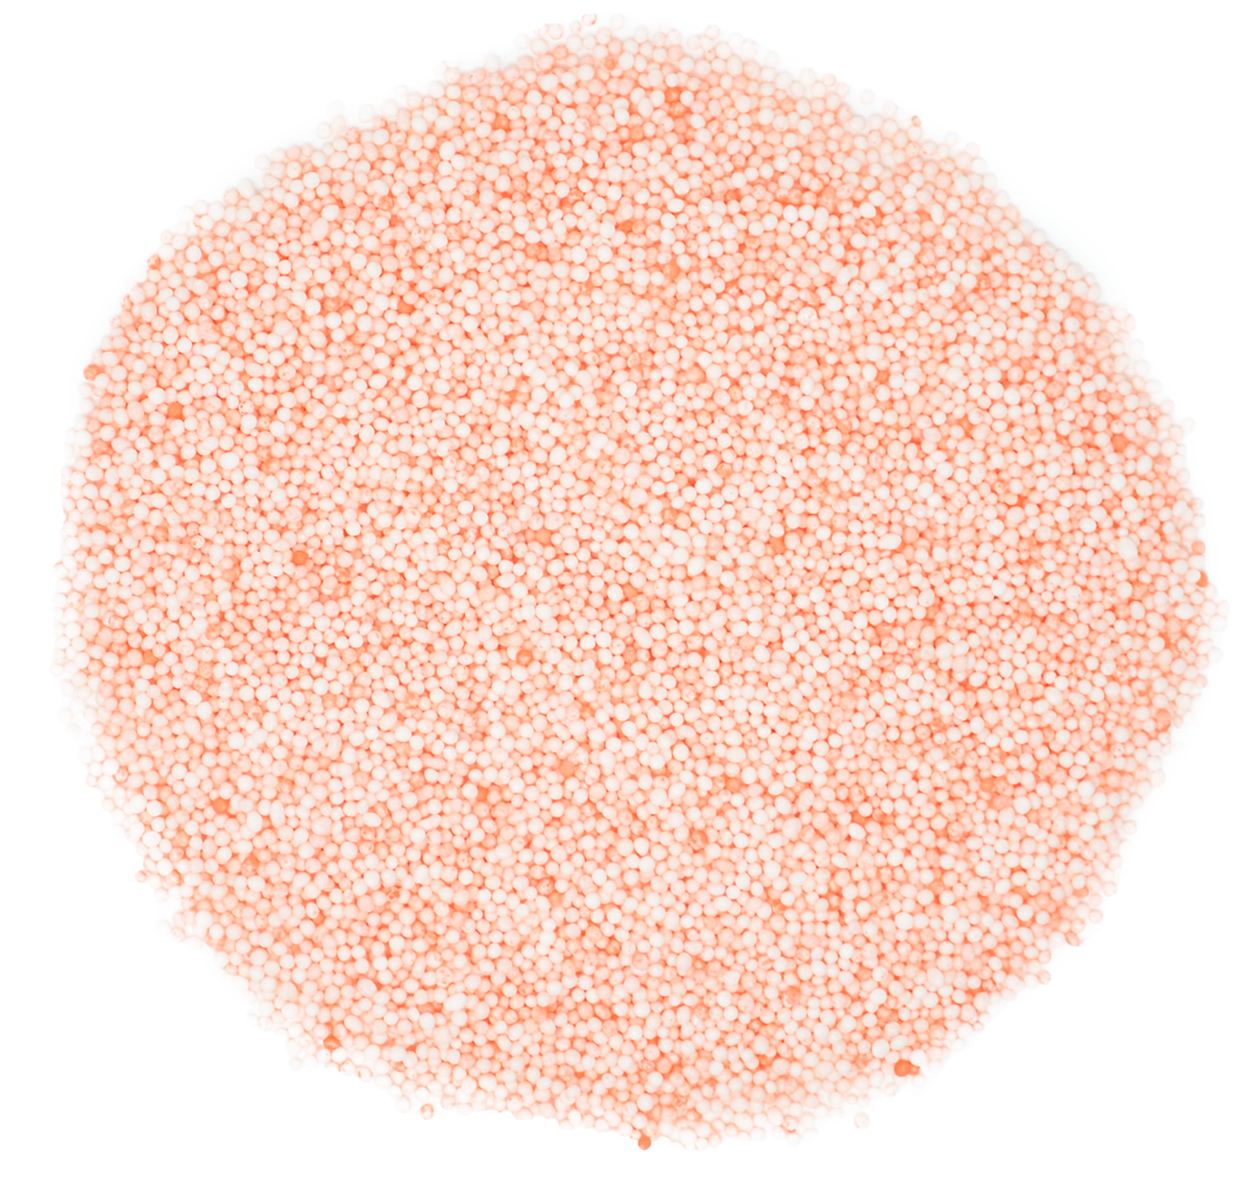 Load image into Gallery viewer, Pleasantly Peach Nonpareils 3.8oz Bottle
